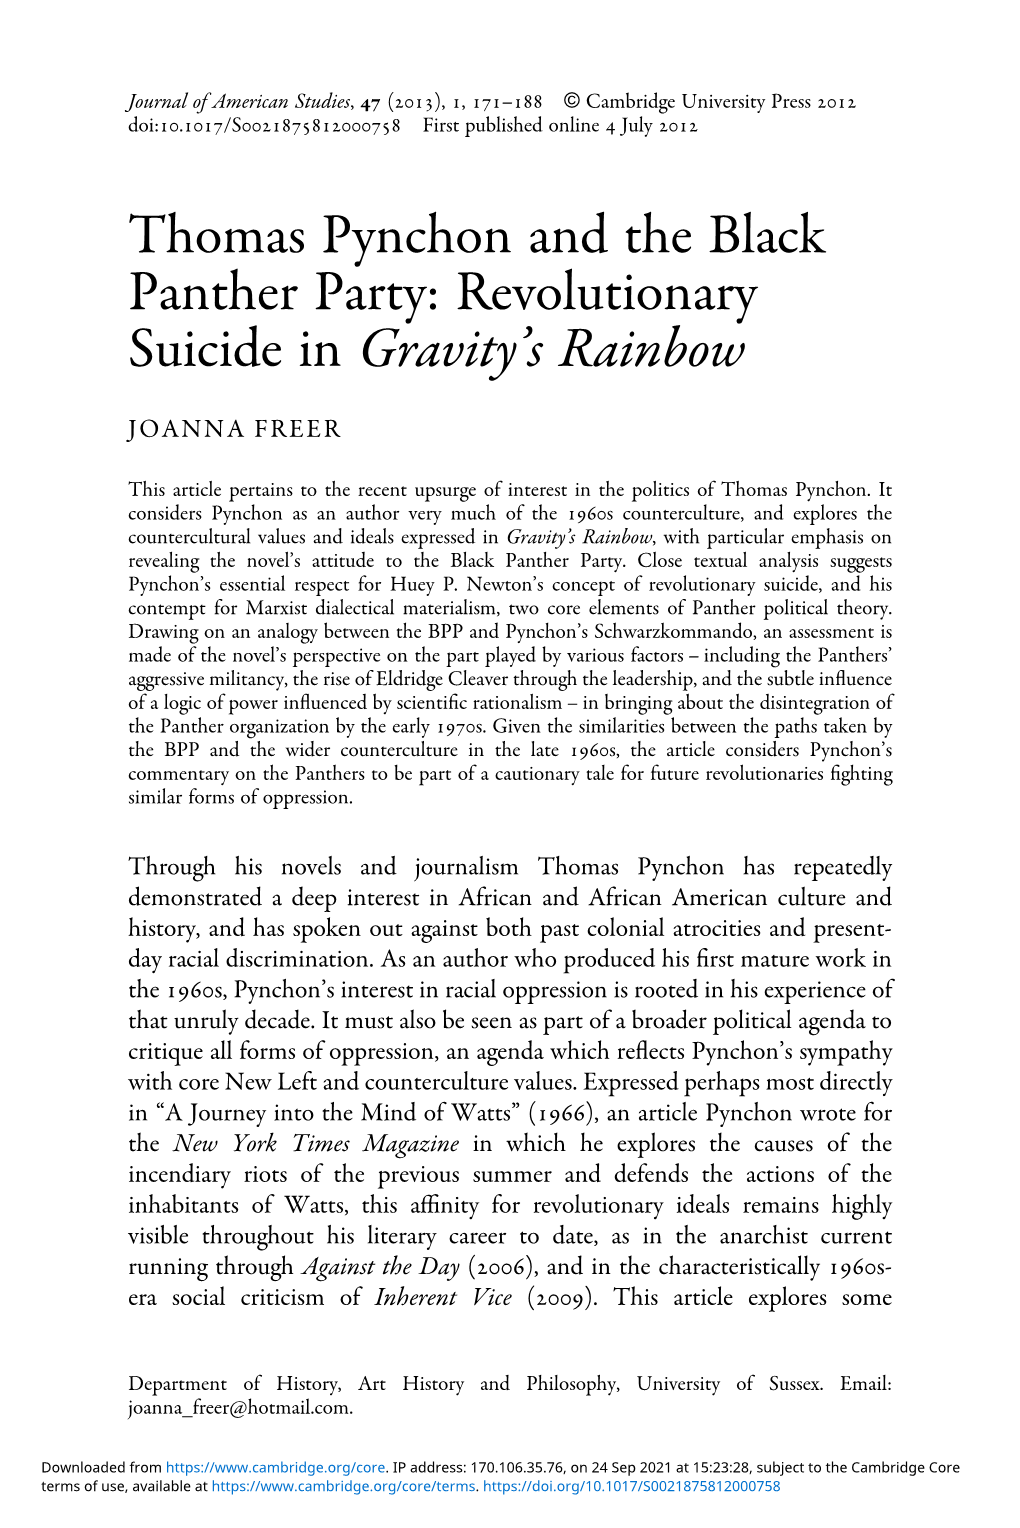 Thomas Pynchon and the Black Panther Party: Revolutionary Suicide in Gravity’S Rainbow